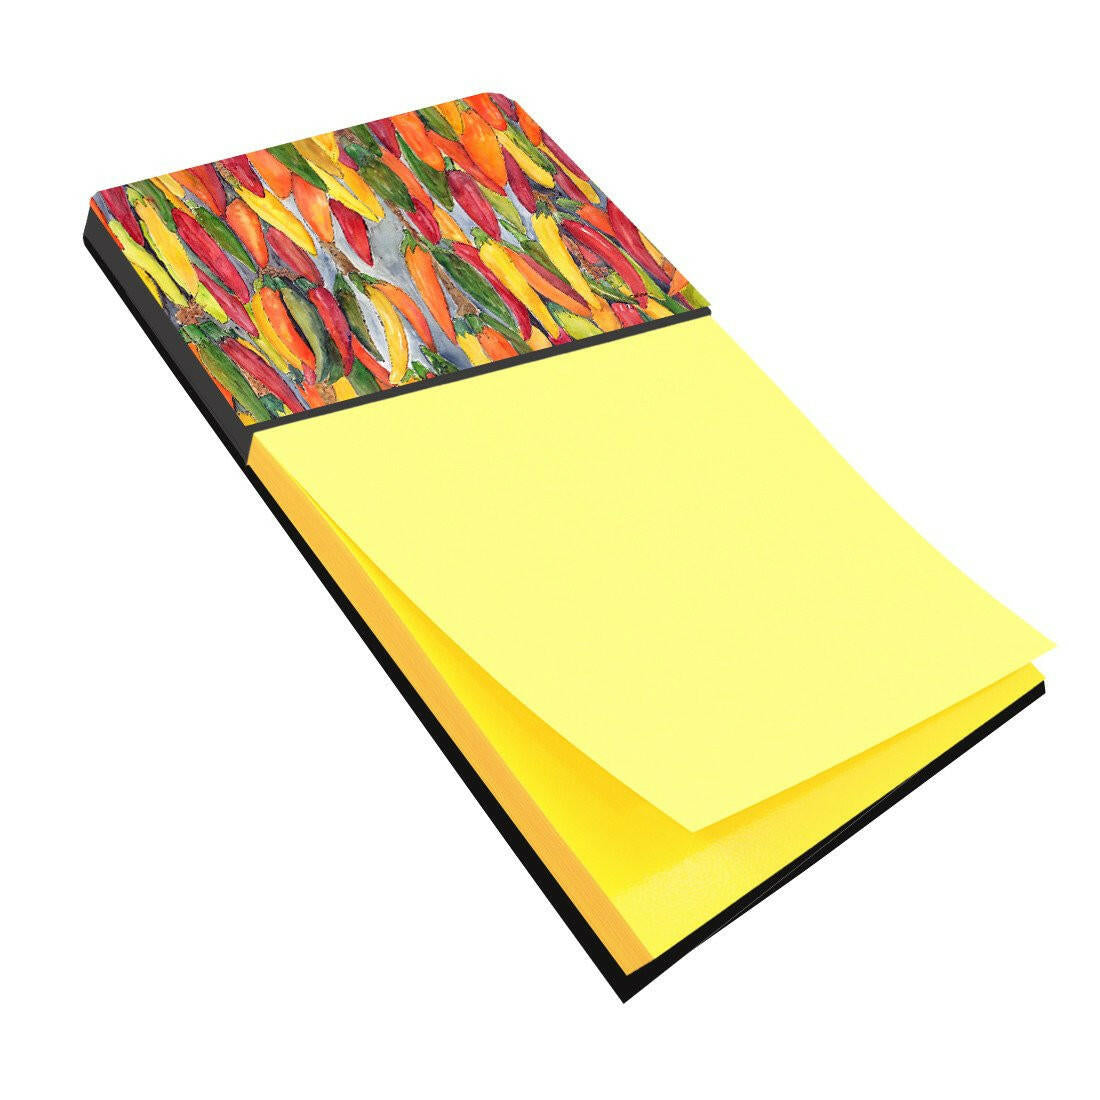 Hot Peppers Refiillable Sticky Note Holder or Postit Note Dispenser 8893SN by Caroline's Treasures